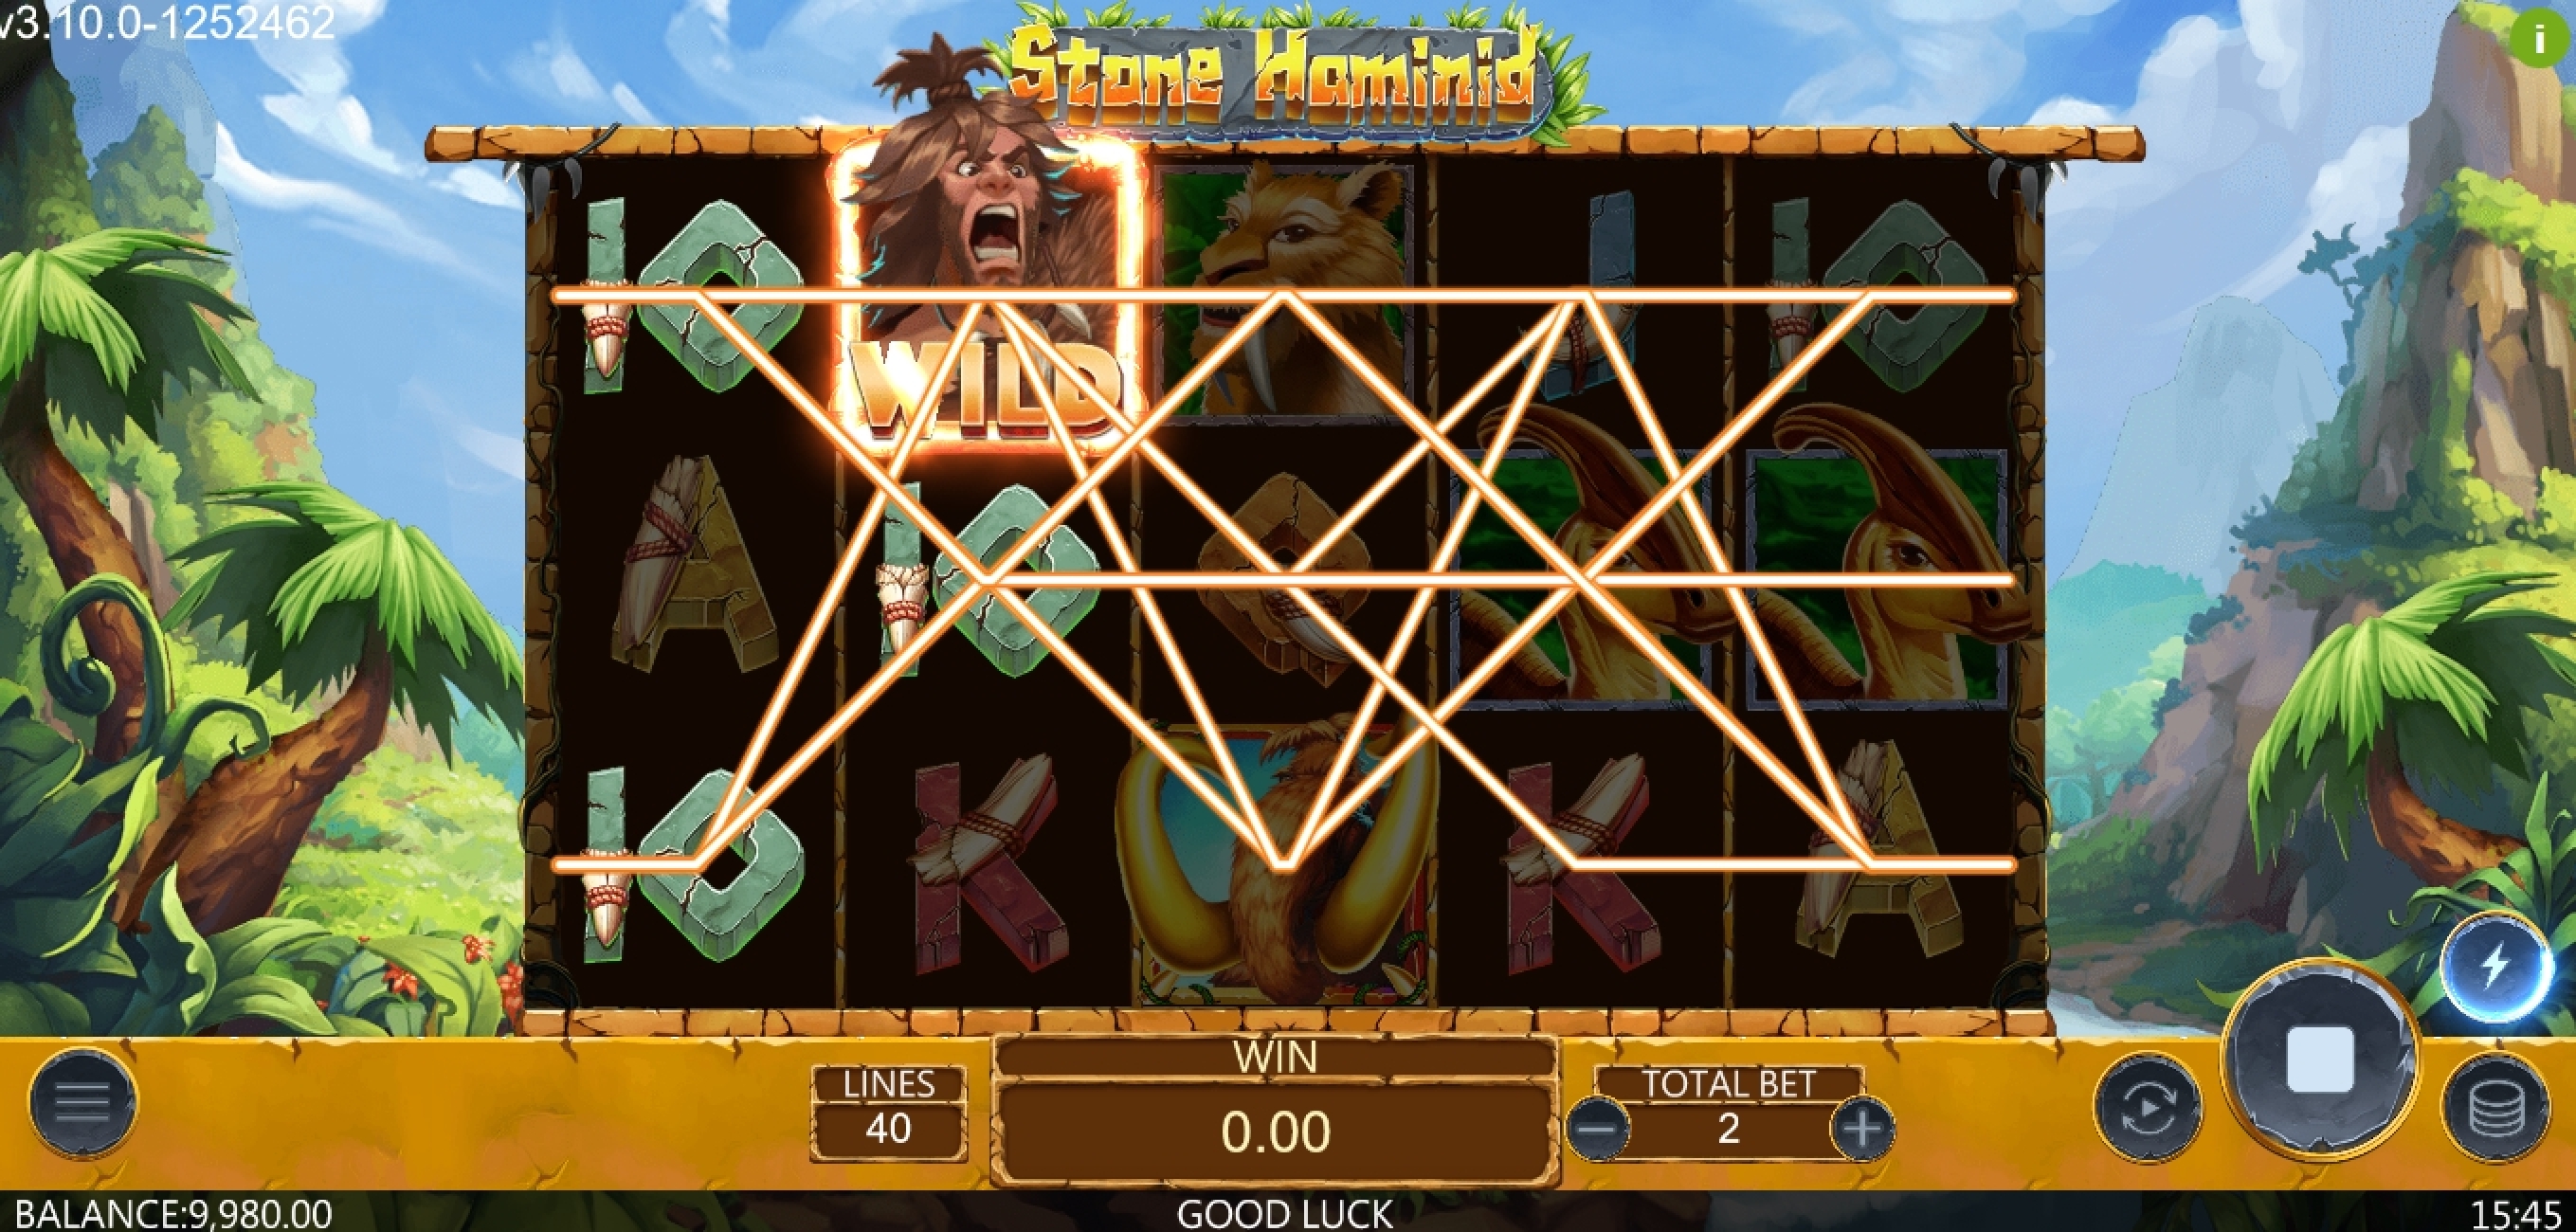 Win Money in Stone Hominid Free Slot Game by Dragoon Soft